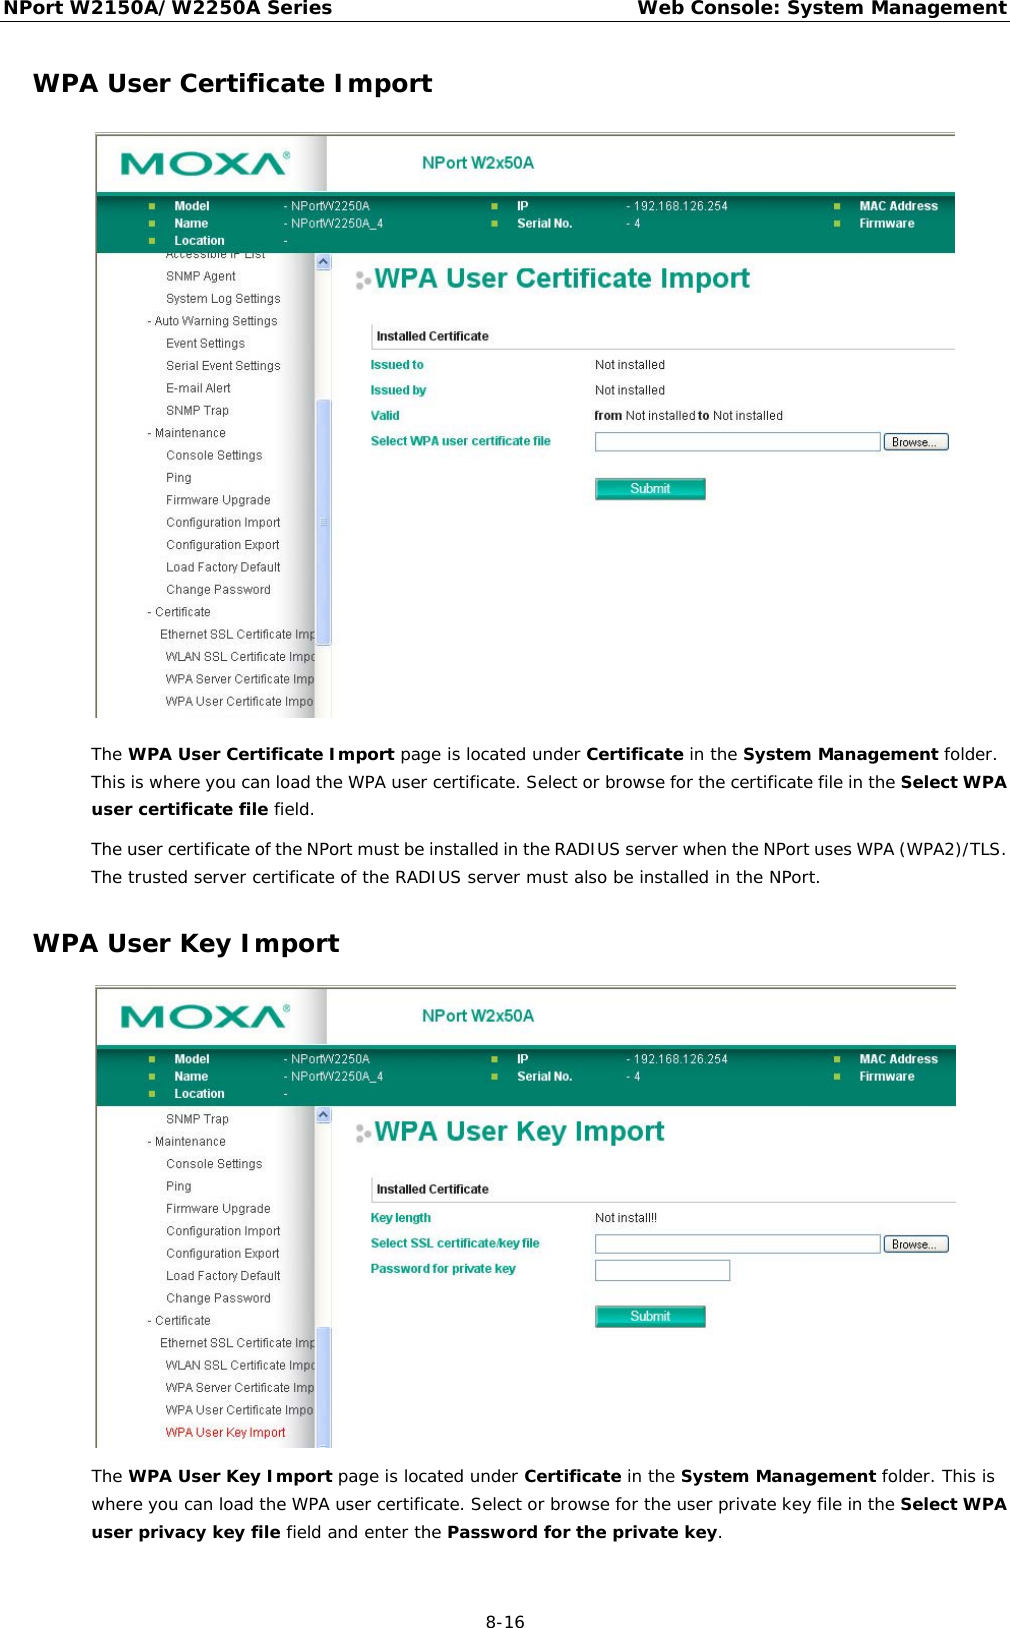 NPort W2150A/W2250A Series Web Console: System Management  8-16 WPA User Certificate Import  The WPA User Certificate Import page is located under Certificate in the System Management folder. This is where you can load the WPA user certificate. Select or browse for the certificate file in the Select WPA user certificate file field. The user certificate of the NPort must be installed in the RADIUS server when the NPort uses WPA (WPA2)/TLS. The trusted server certificate of the RADIUS server must also be installed in the NPort. WPA User Key Import  The WPA User Key Import page is located under Certificate in the System Management folder. This is where you can load the WPA user certificate. Select or browse for the user private key file in the Select WPA user privacy key file field and enter the Password for the private key. 